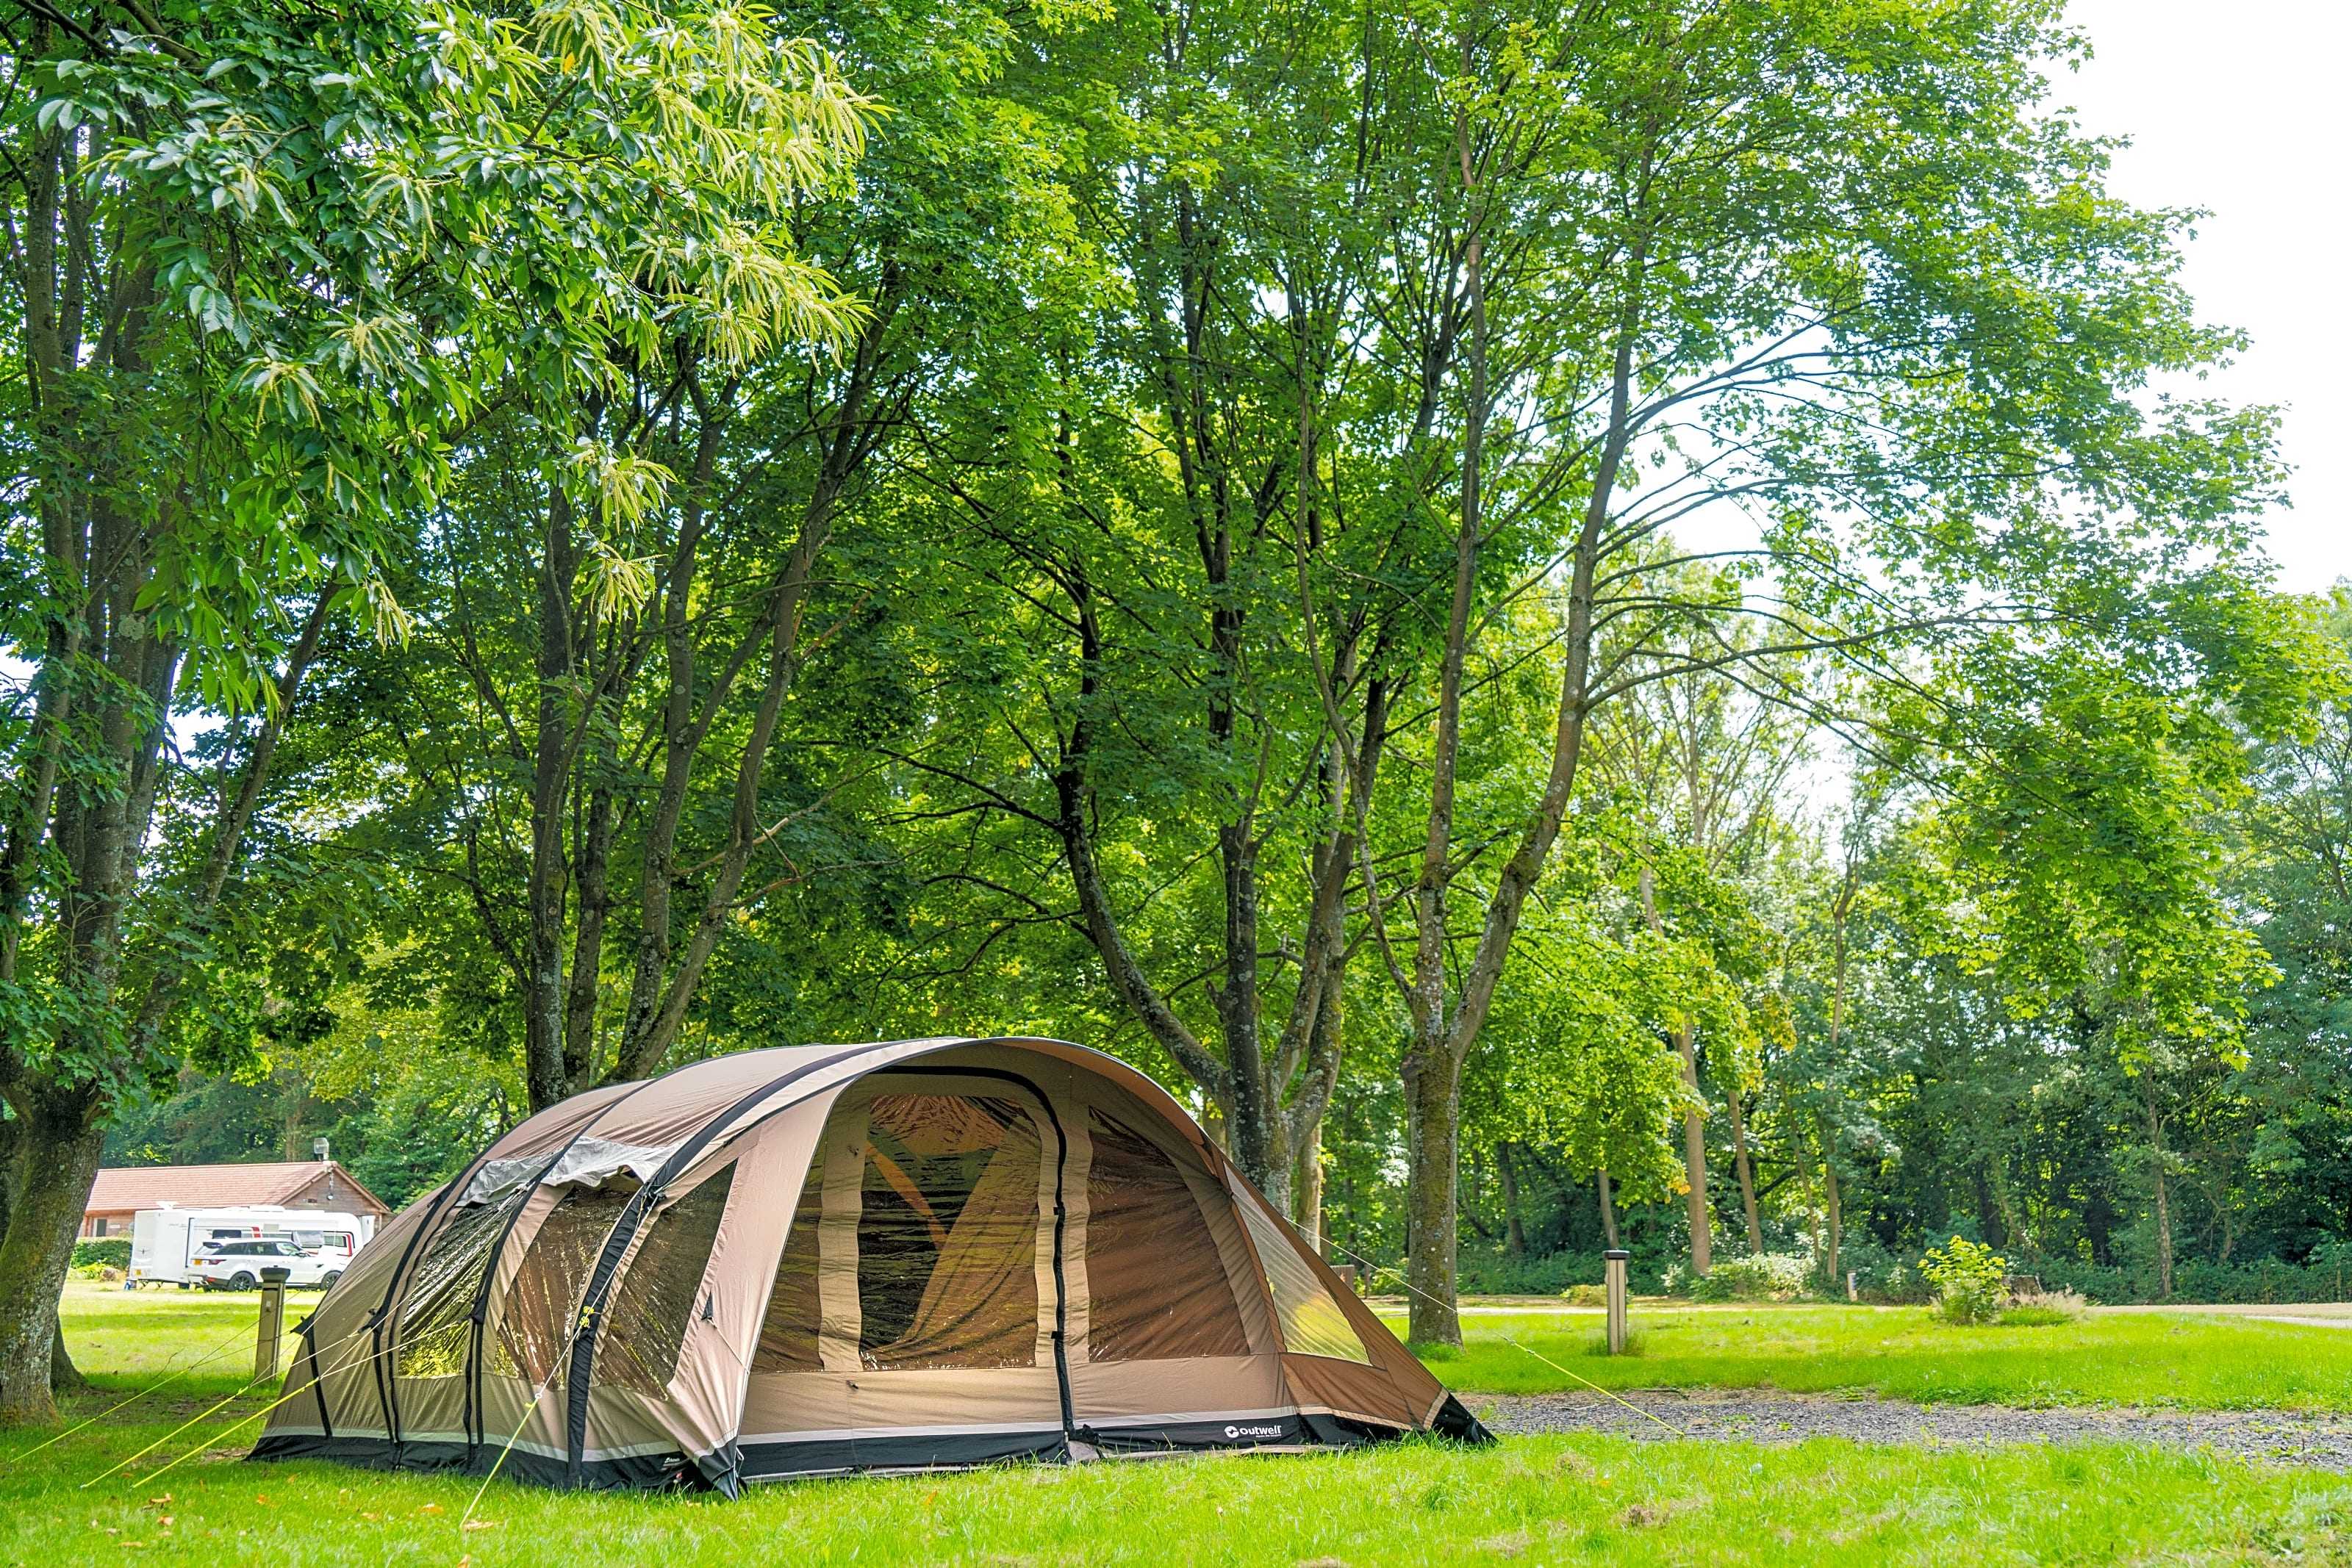 Choosing the right tent is an important part of a camping holiday